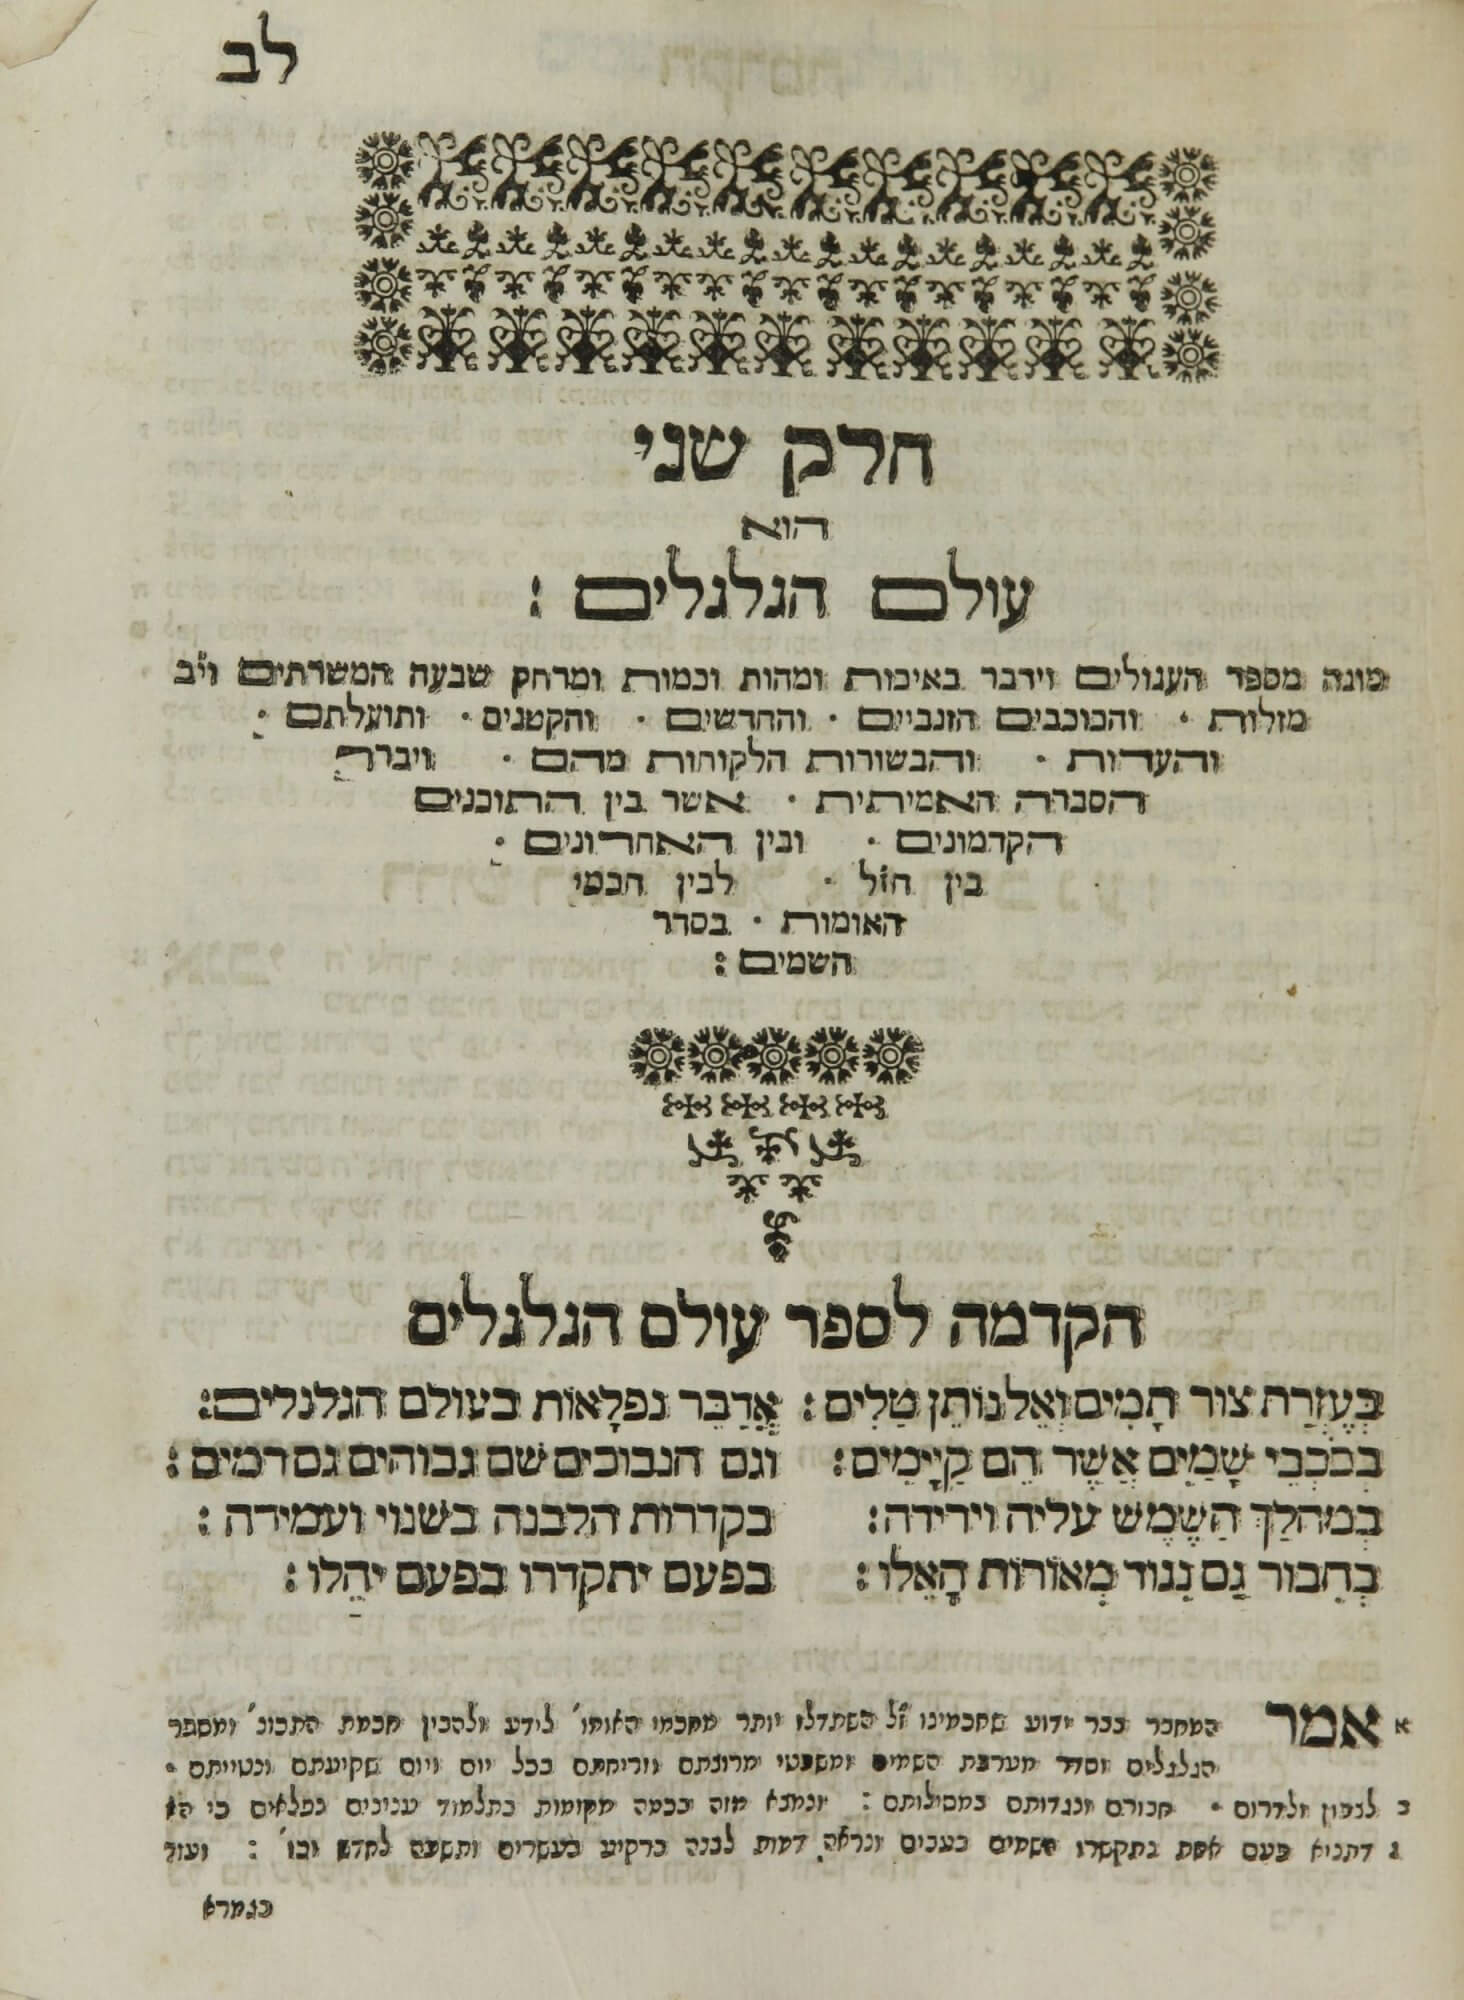 This decorative chapter title showcases several sizes and weights of Hebrew type. The use of both elongated and regular forms of several letters, including ה (he), ת (tav), and ם (final mem), is particularly visible in the triangle of text at the top of the page. Stretching letters with horizontal lines was a common convention in Hebrew printing used to justify lines.